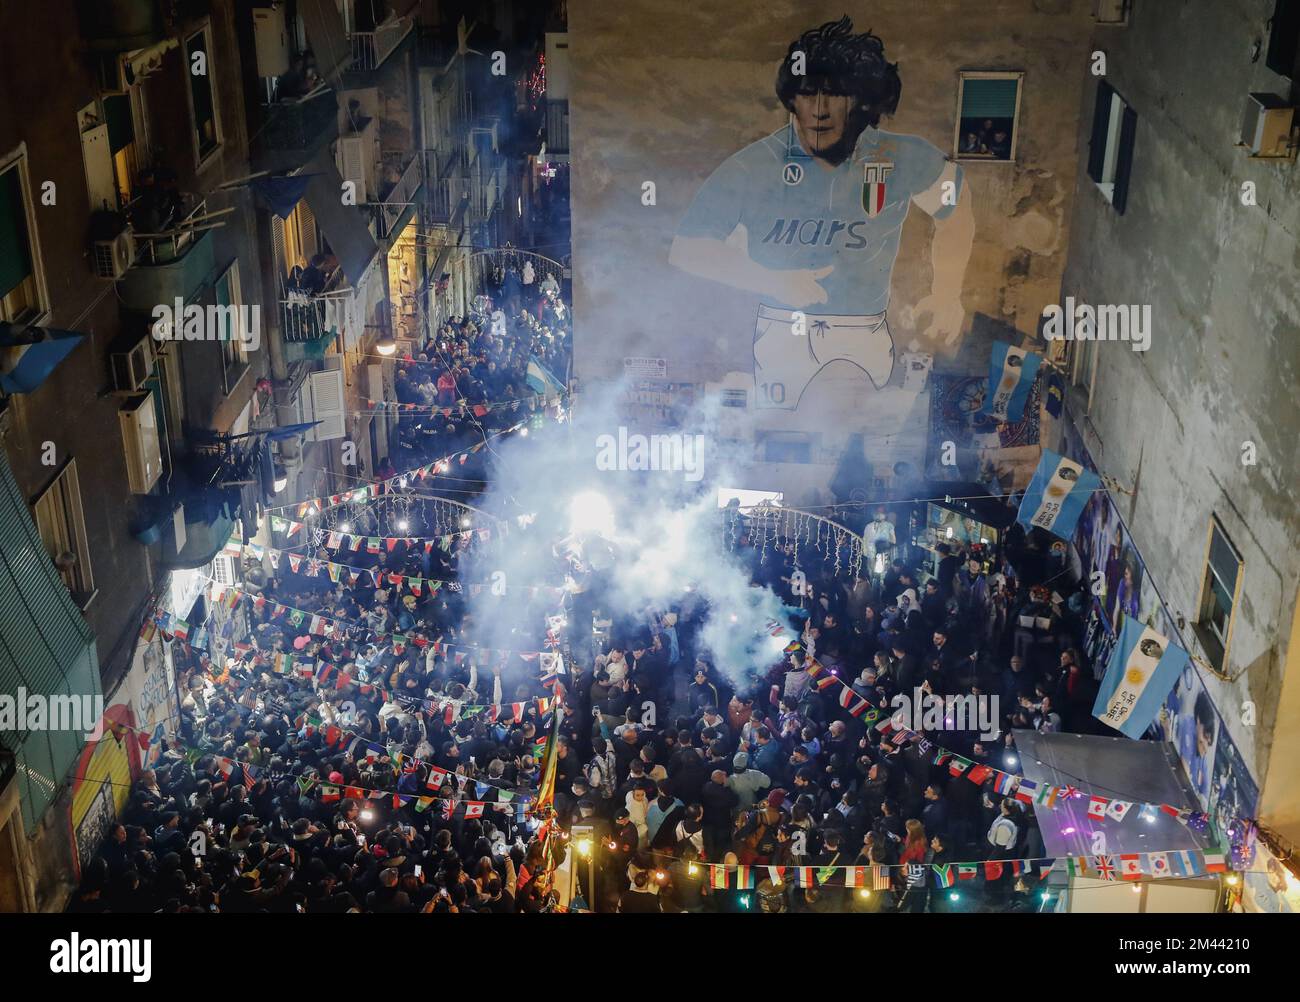 Naples, Italy. 18th Dec, 2022. Argentine fans celebrate after Argentina beat France to win the 2022 FIFA World Cup final in Qatar under the mural dedicated to Diego Armando Maradona in the Spanish quarters. Argentina won 4-2 on penalties after a 3-3 draw after extra time. Credit: Independent Photo Agency/Alamy Live News Stock Photo